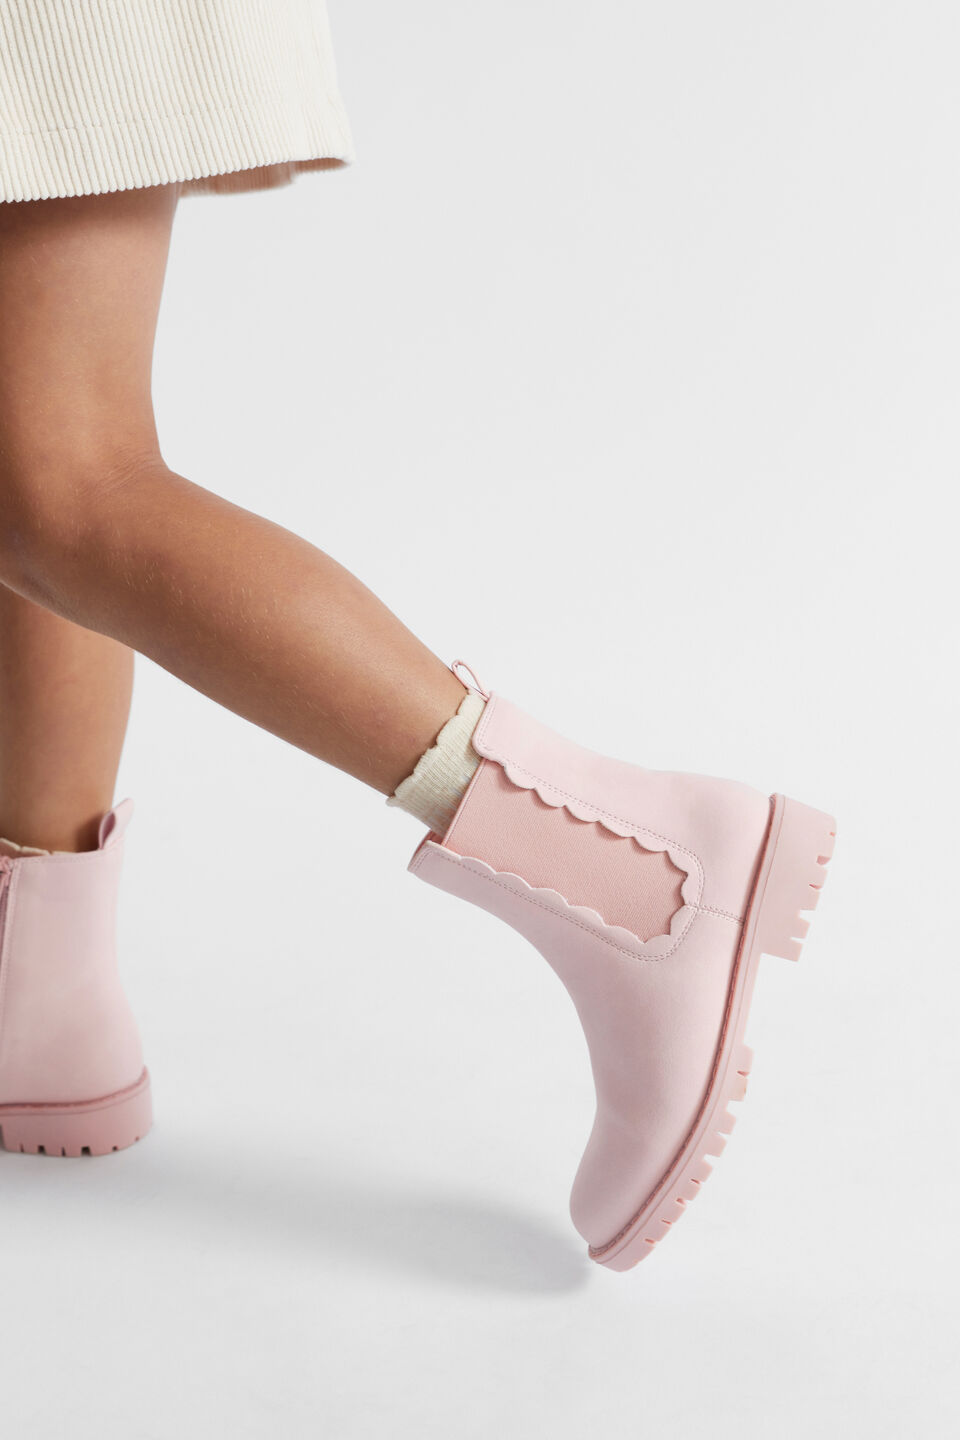 Scallop Gusset Boot  Dusty Rose